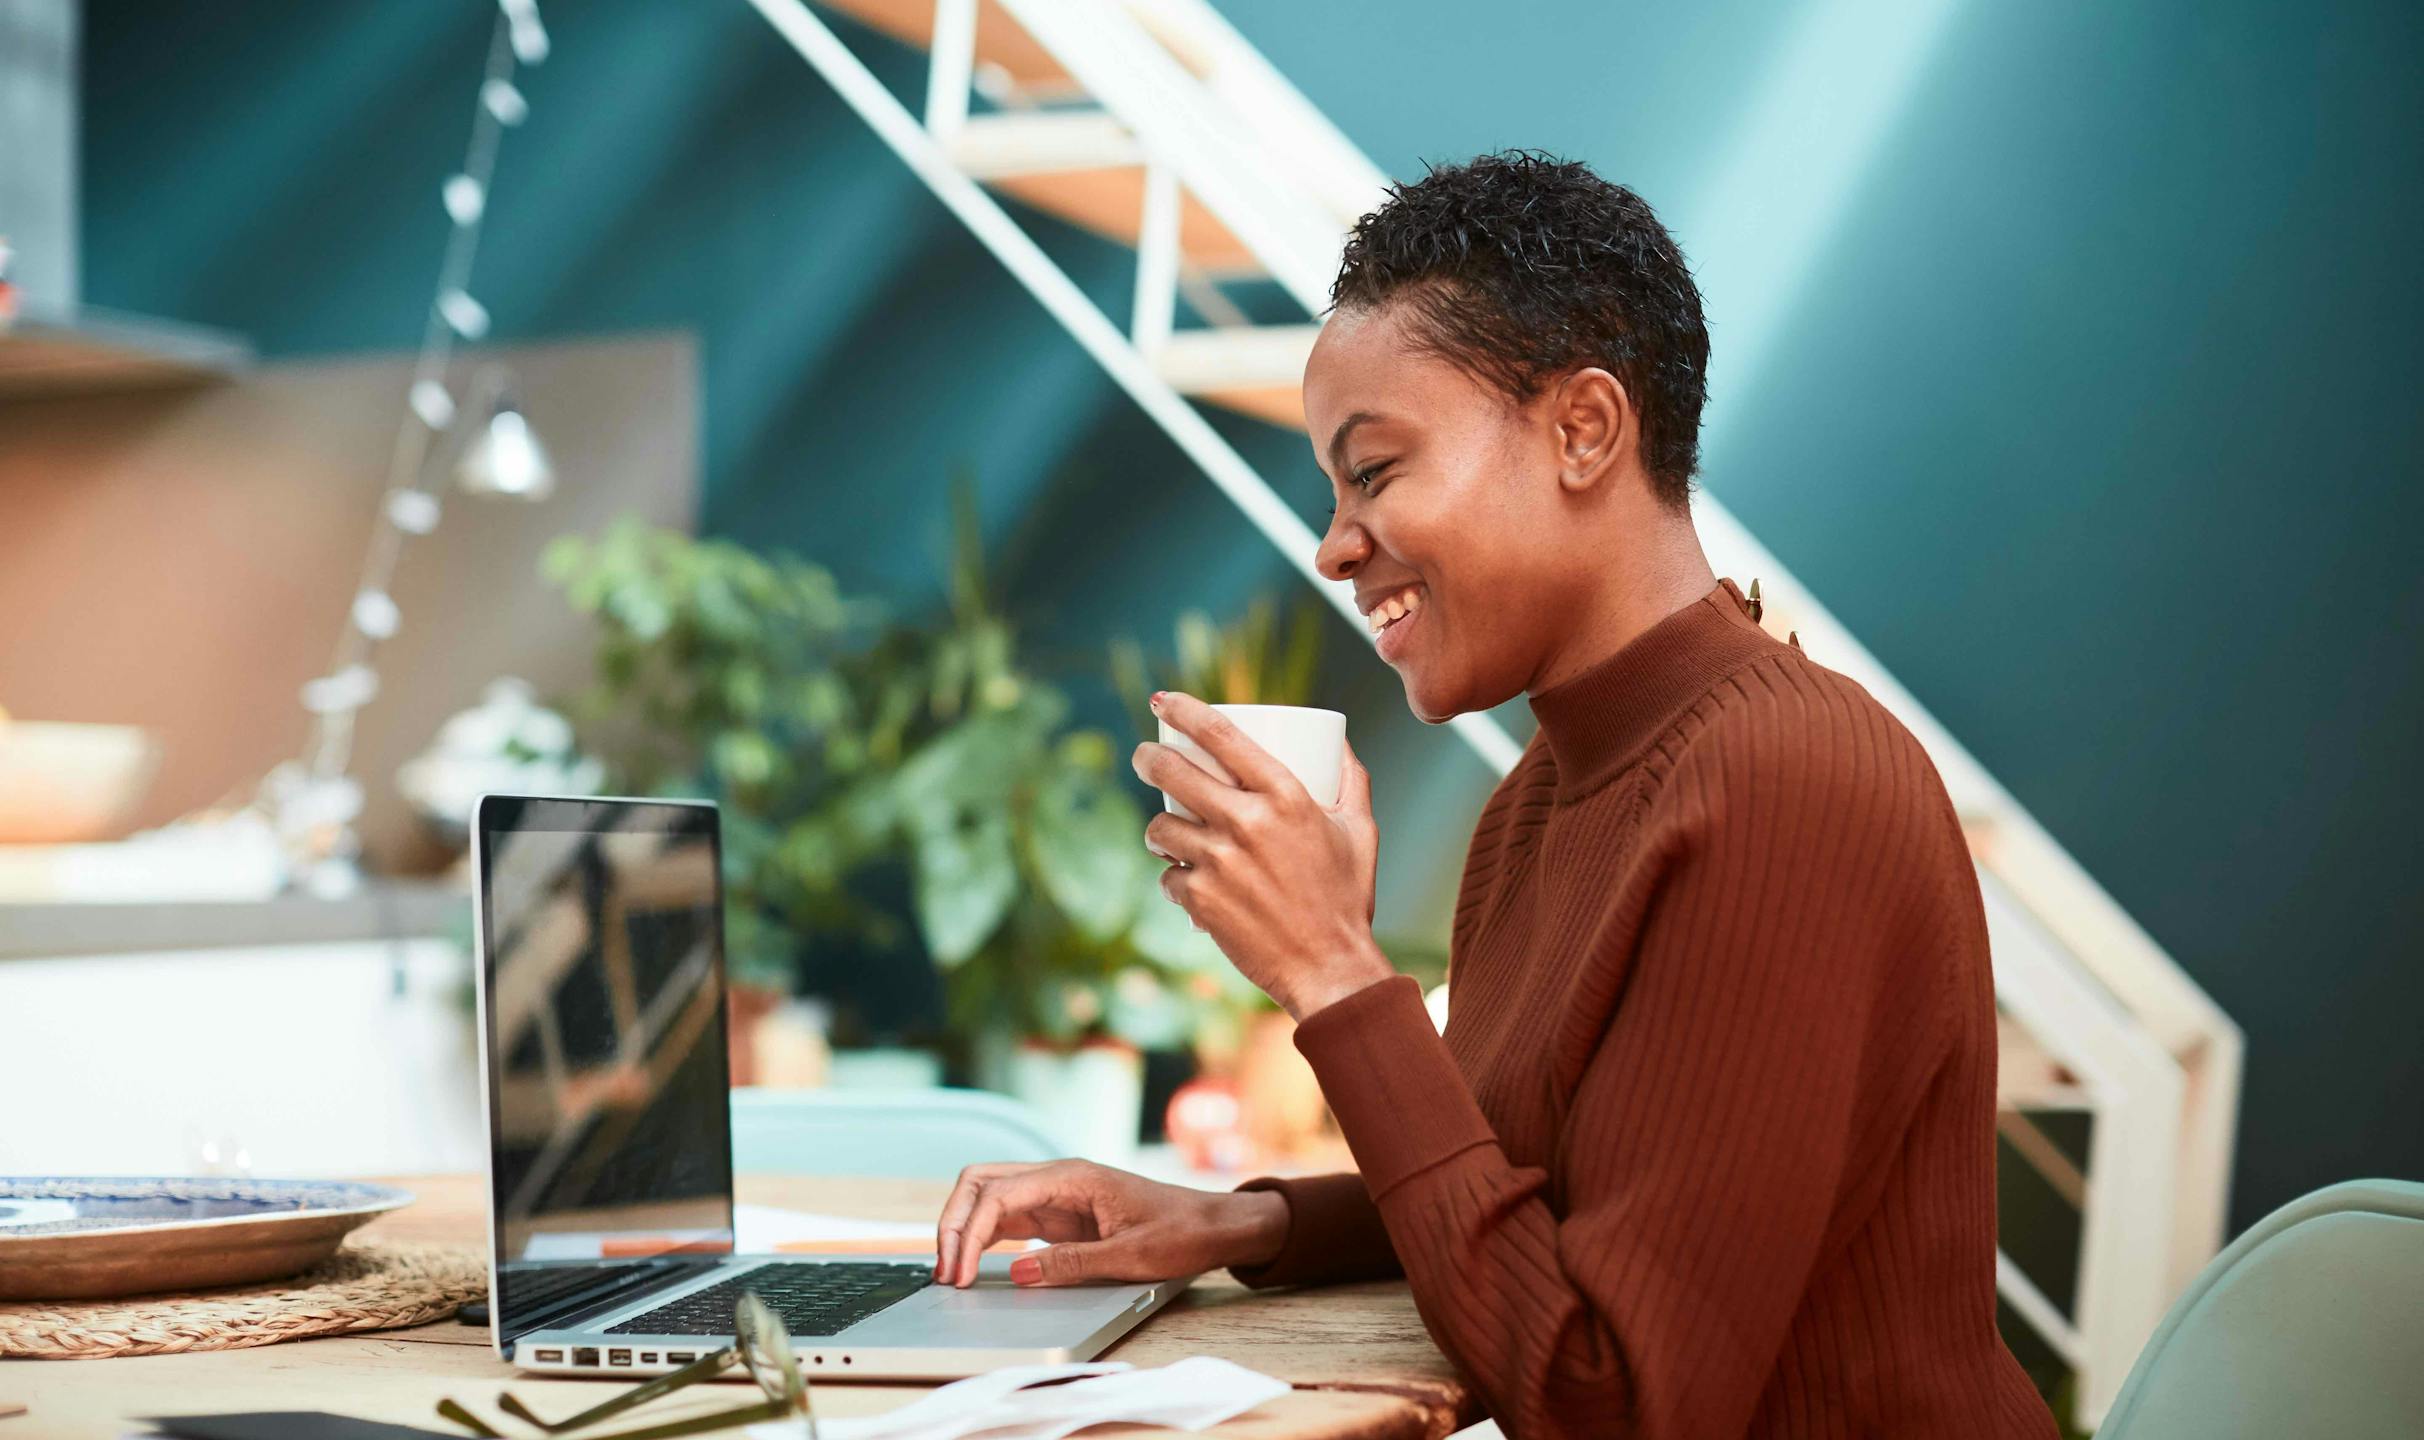 A Black woman holds a cup and smiles at her laptop as she sits in a sunlit office.